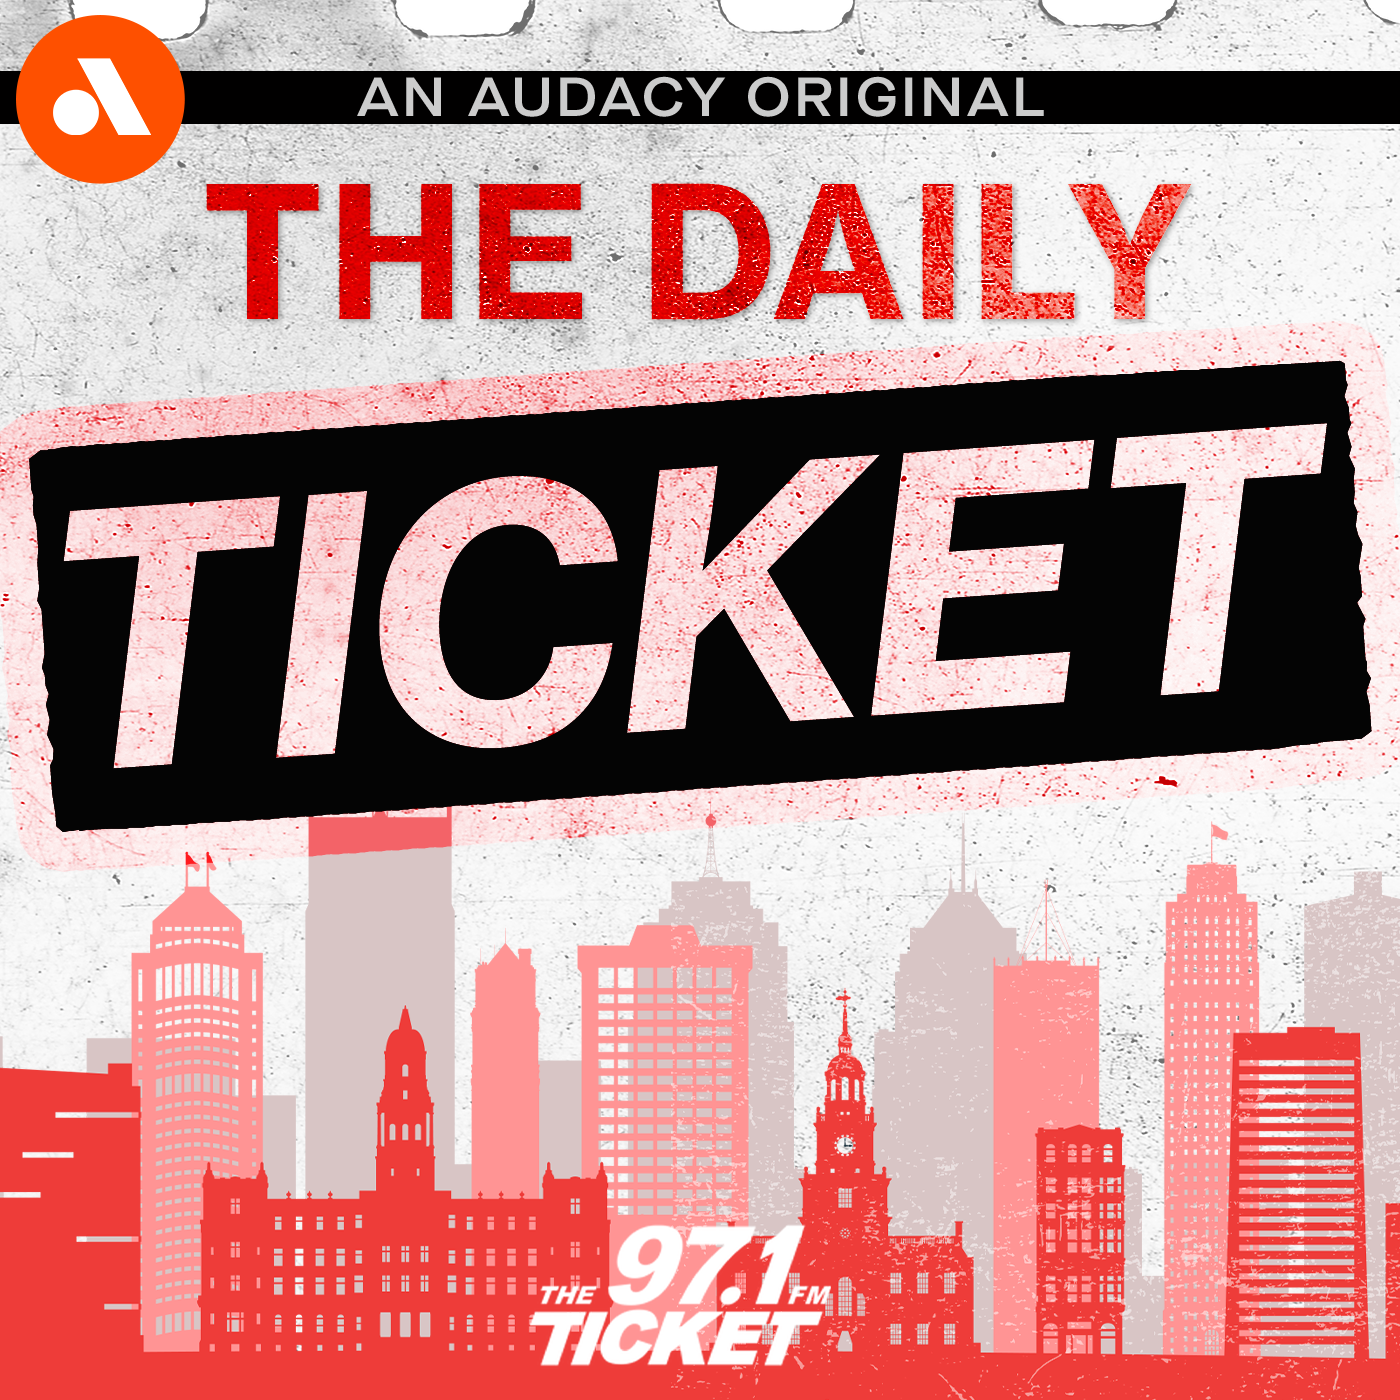 Red Wings See Their Season End In Most Bizarre Way Possible | 'The Daily Ticket'